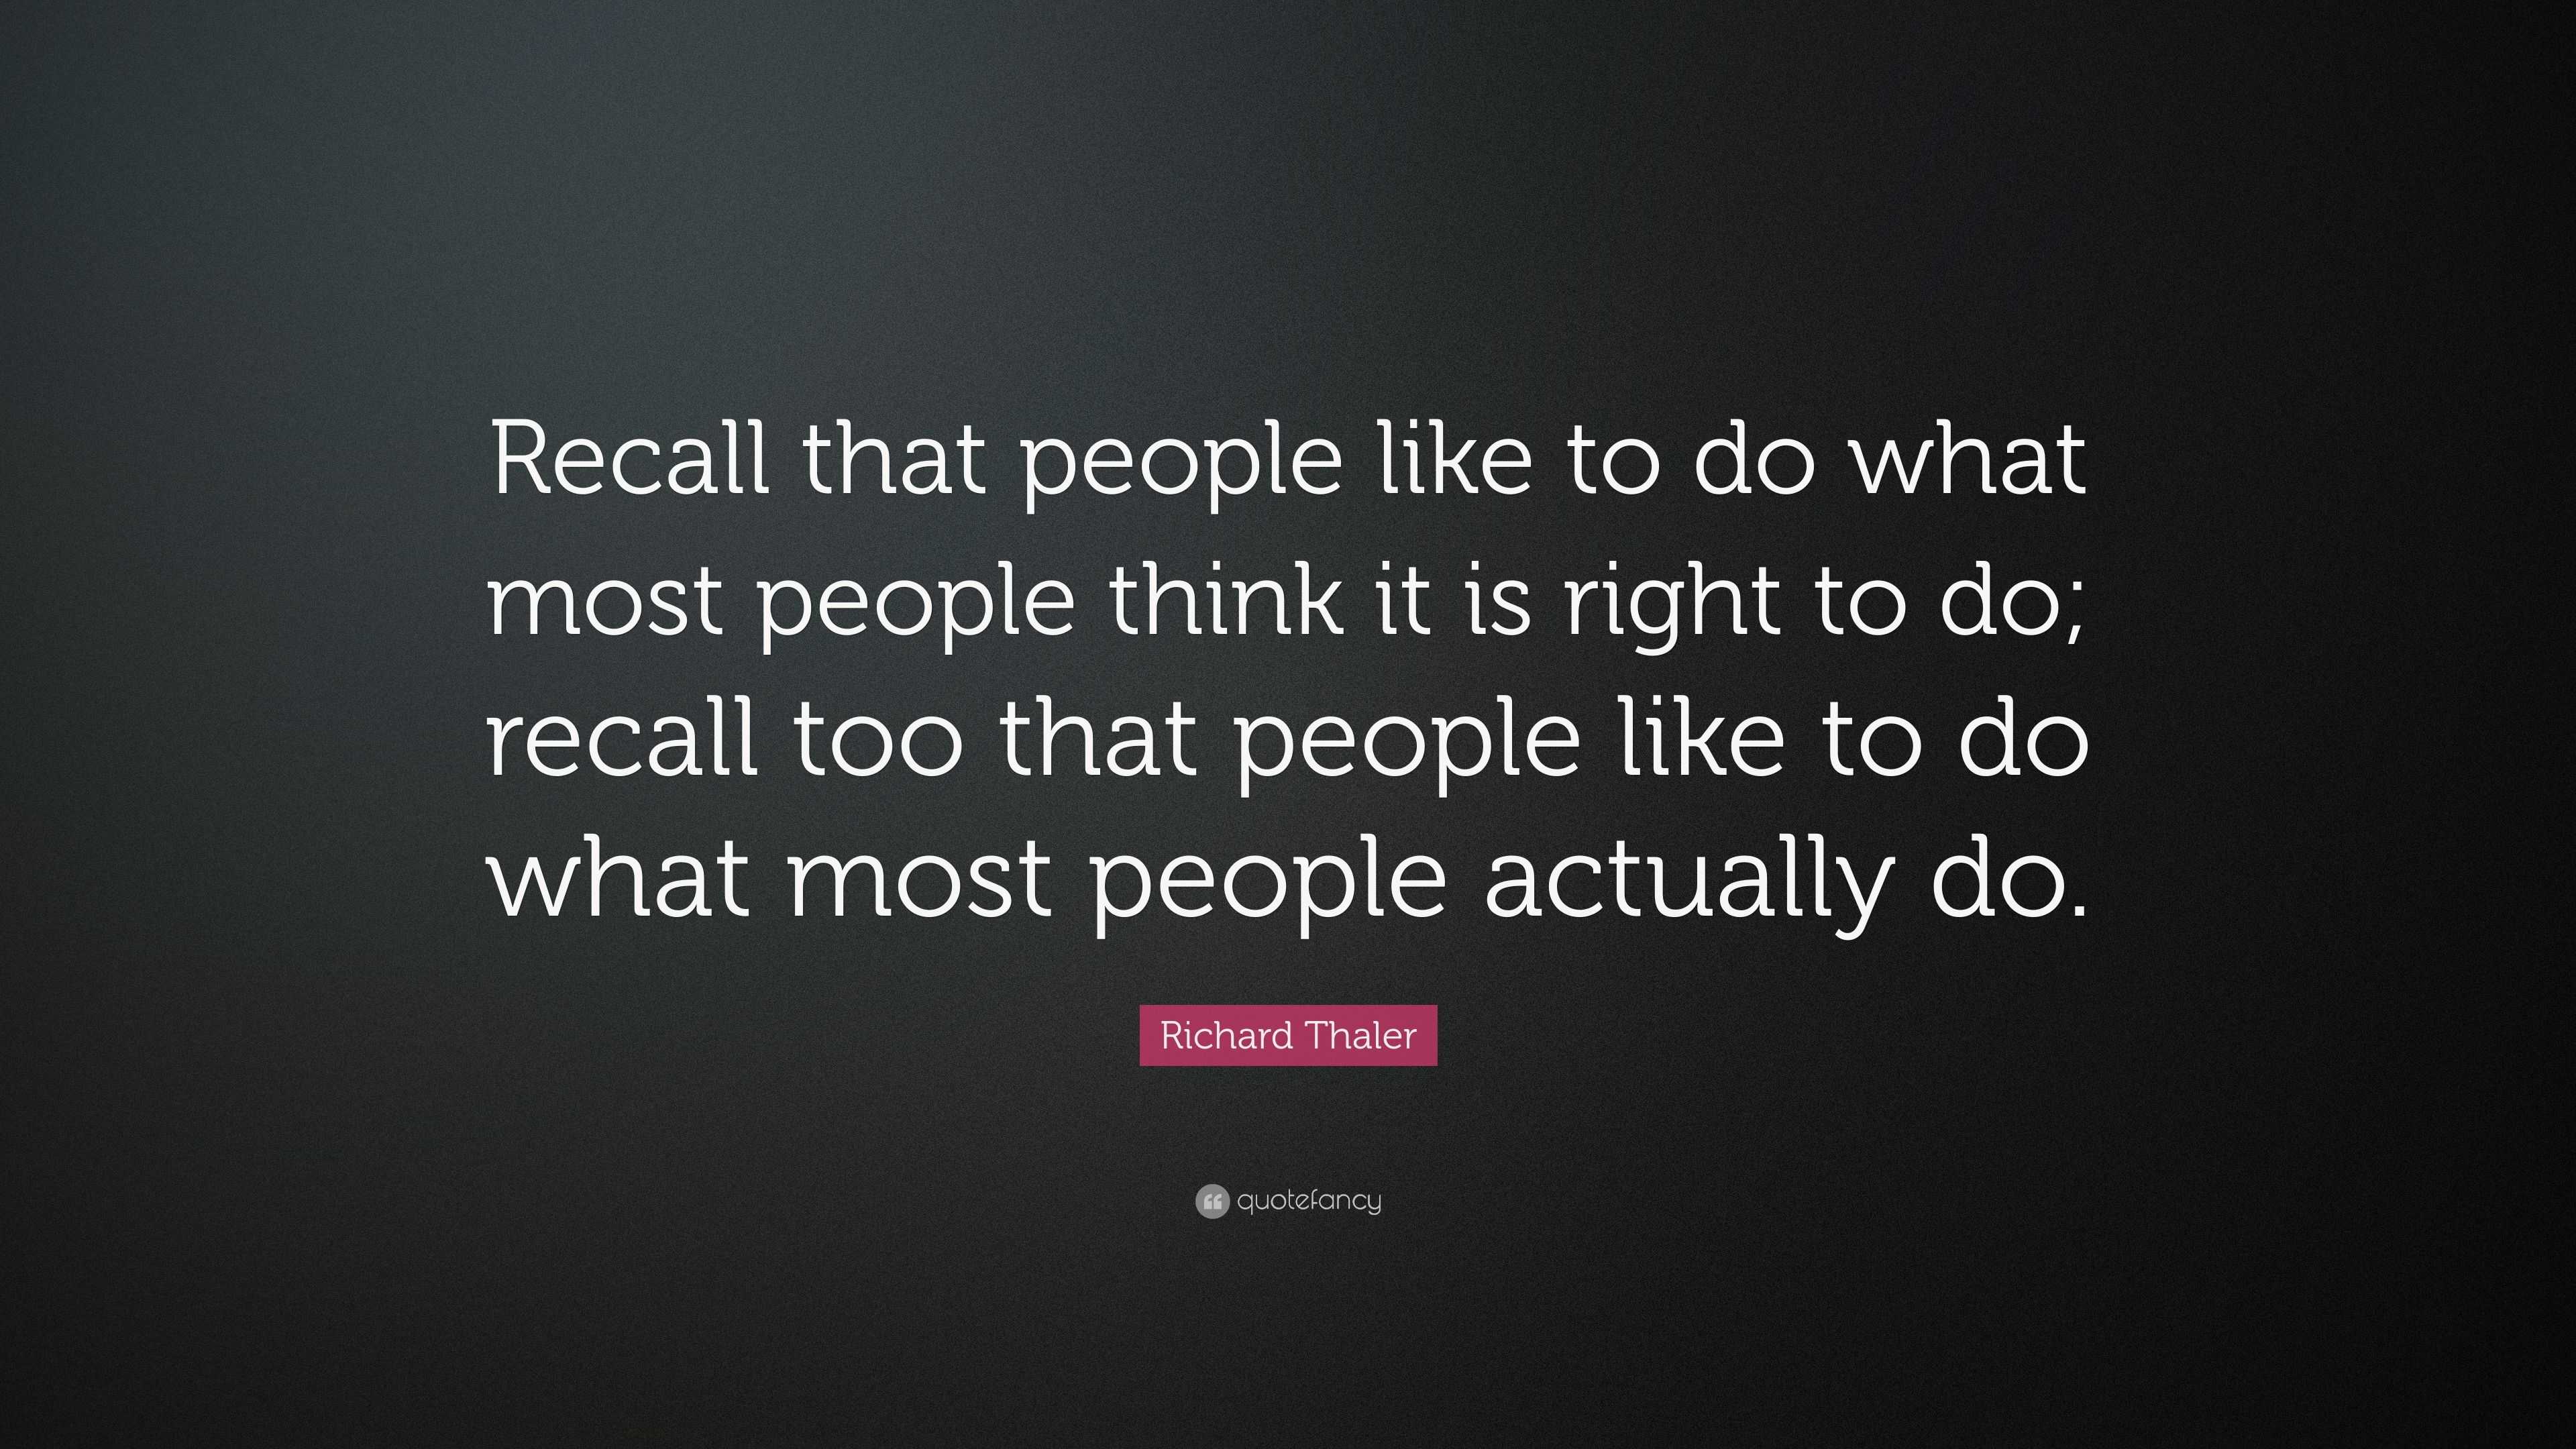 Richard Thaler Quote: “Recall that people like to do what most people ...